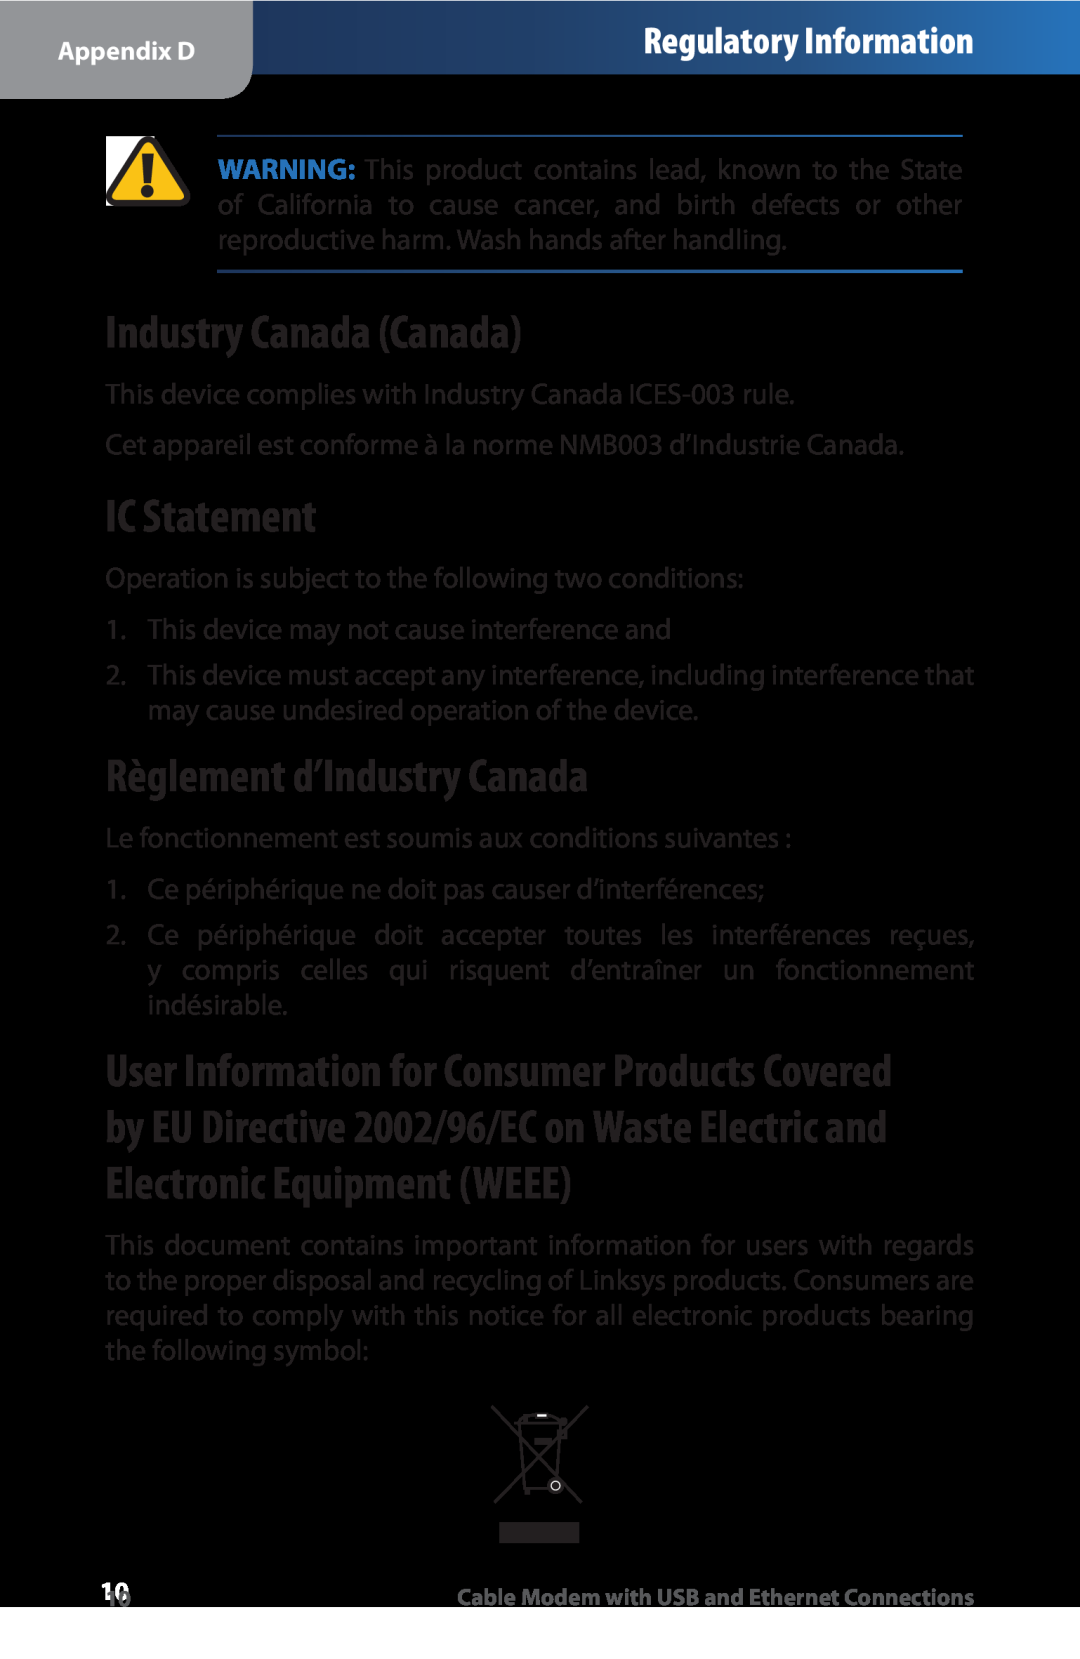 Linksys CM100 manual Industry Canada Canada, IC Statement, Règlement d’Industry Canada, Regulatory Information 